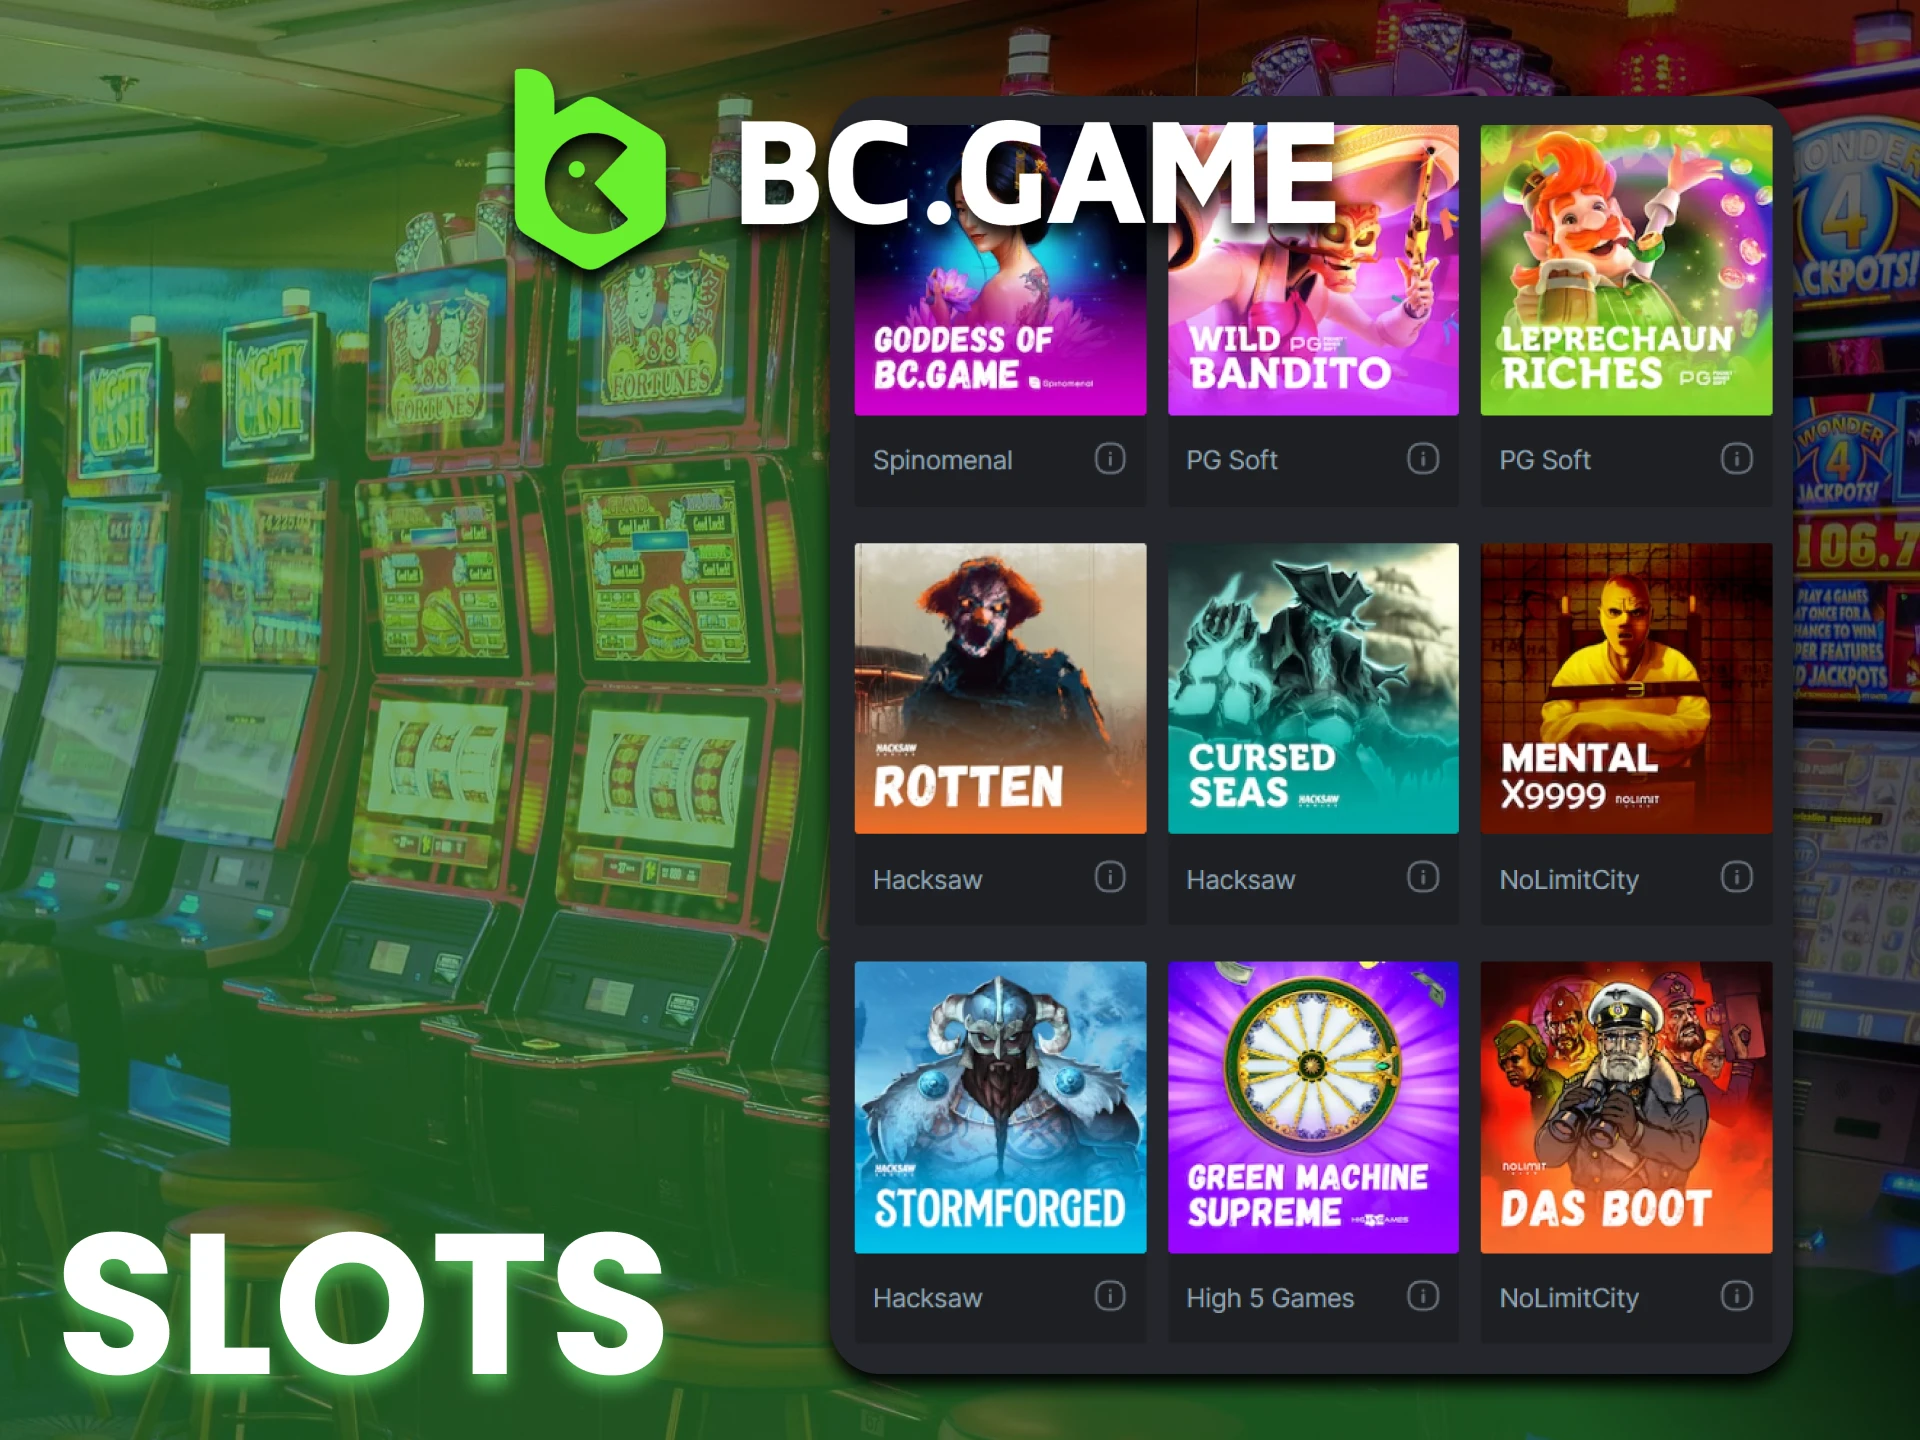 Search for your favourite slots on BC Game slots page.